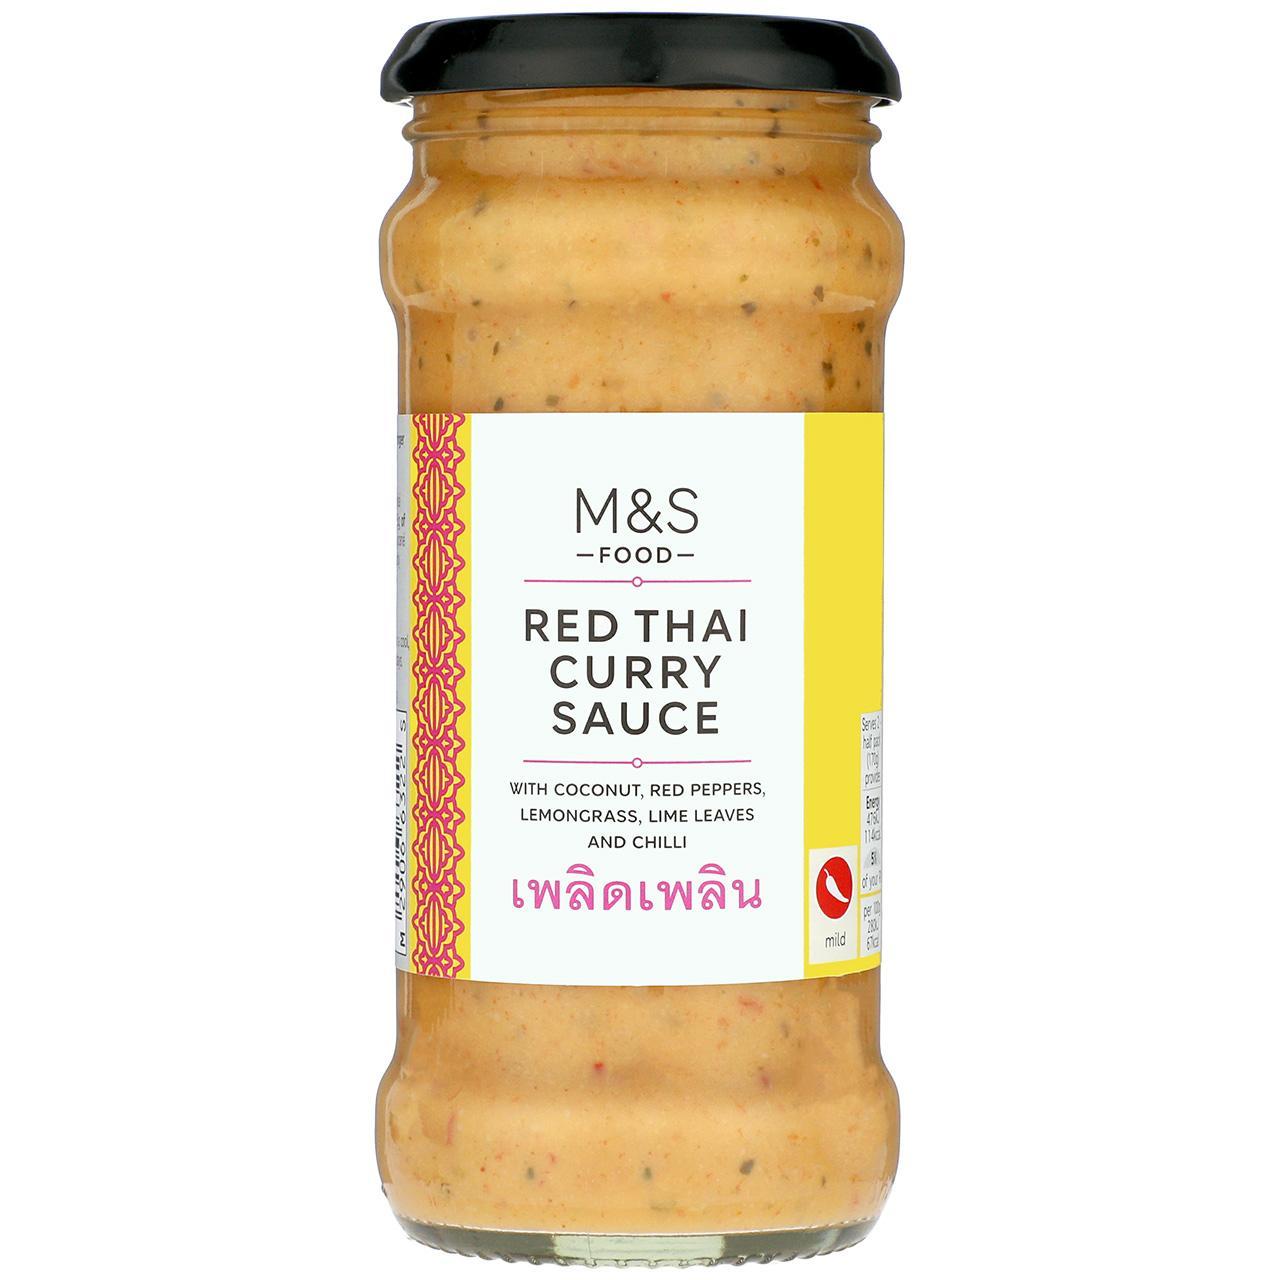 M&S Red Thai Curry Sauce